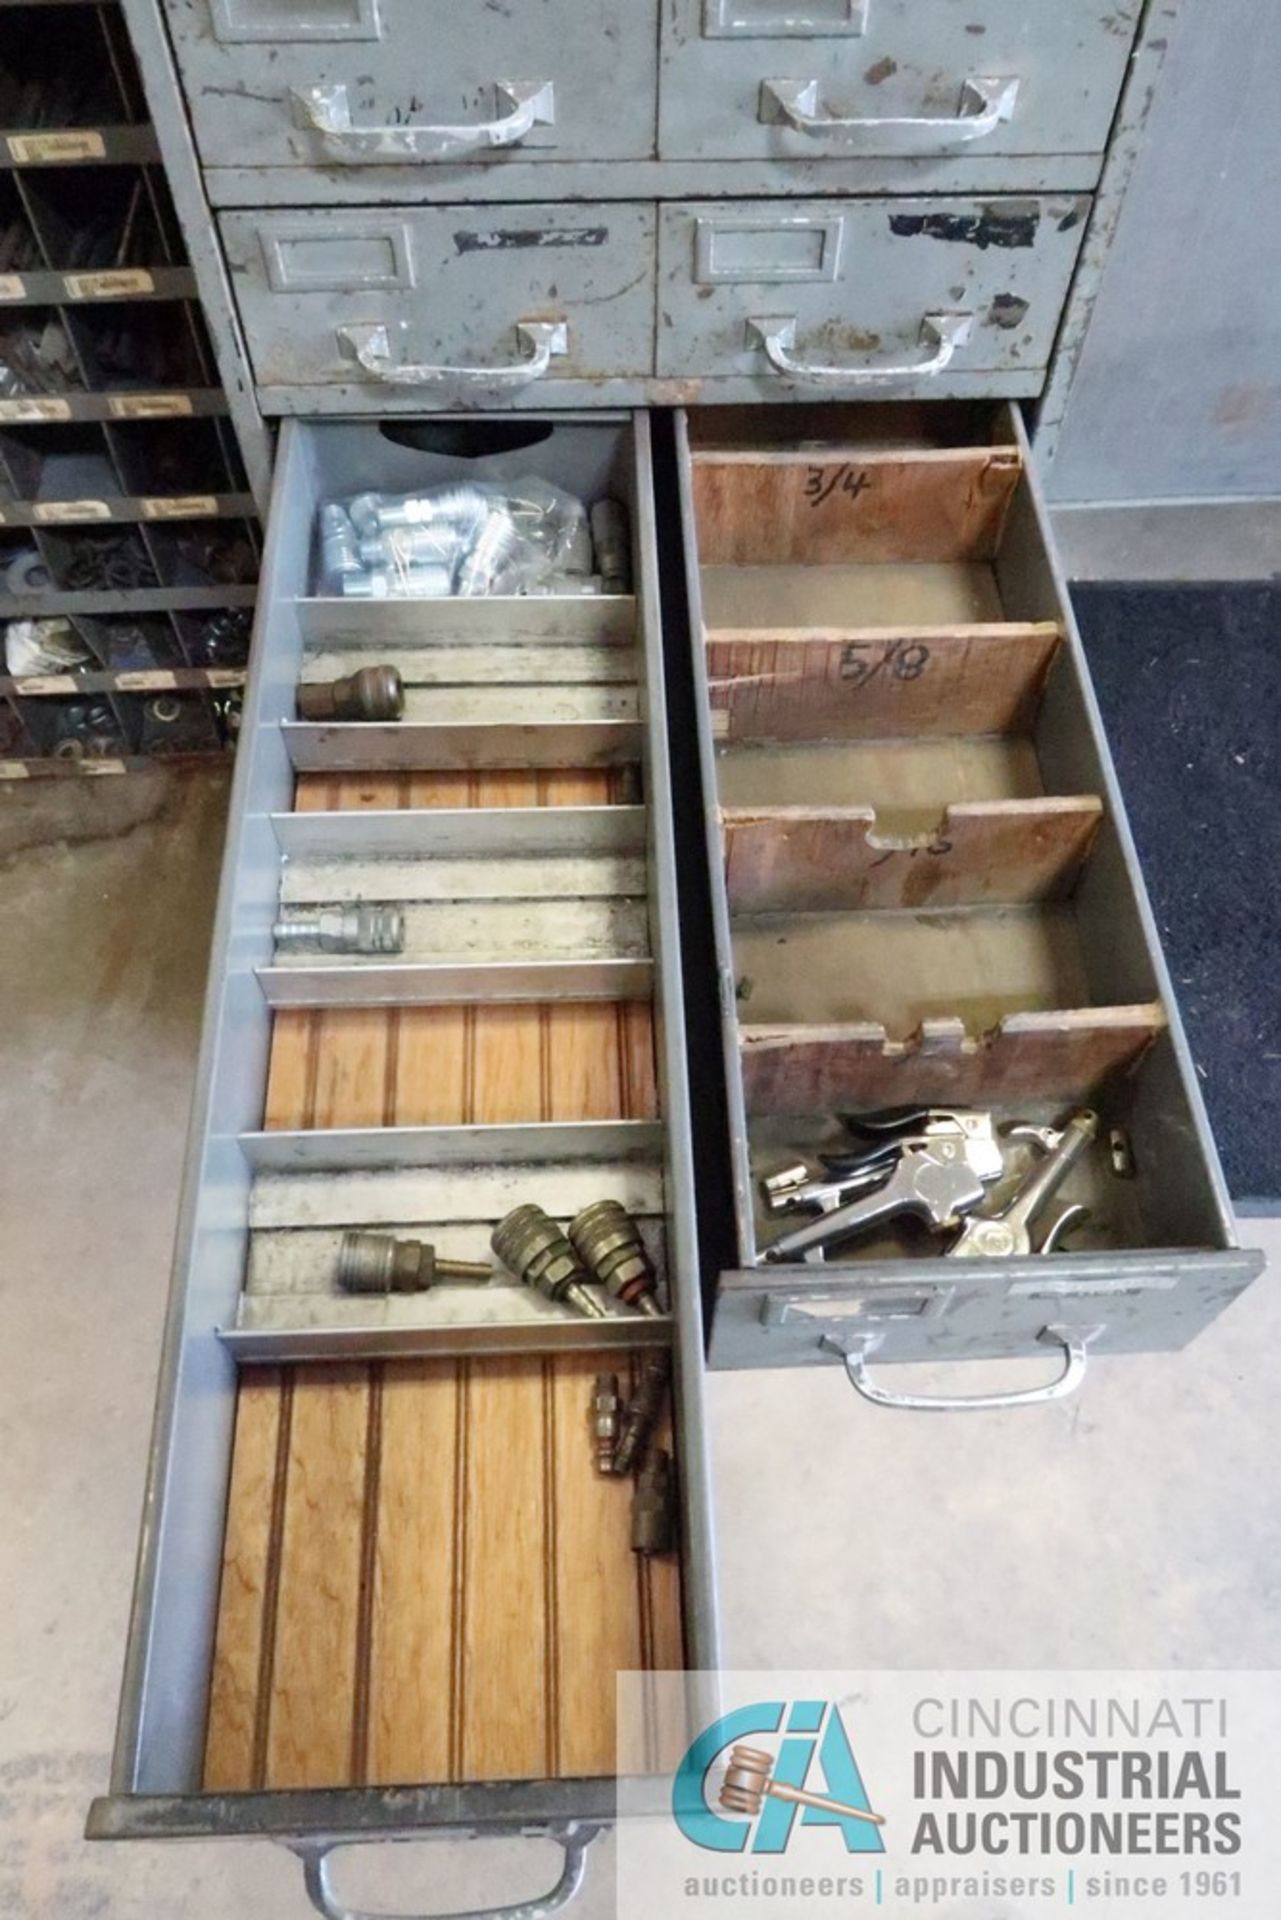 (LOT) MISCELLANEOUS ELECTRICAL, PNEUMATIC, AND MACHINE COMPONENTS WITH CABINETS - Image 6 of 15